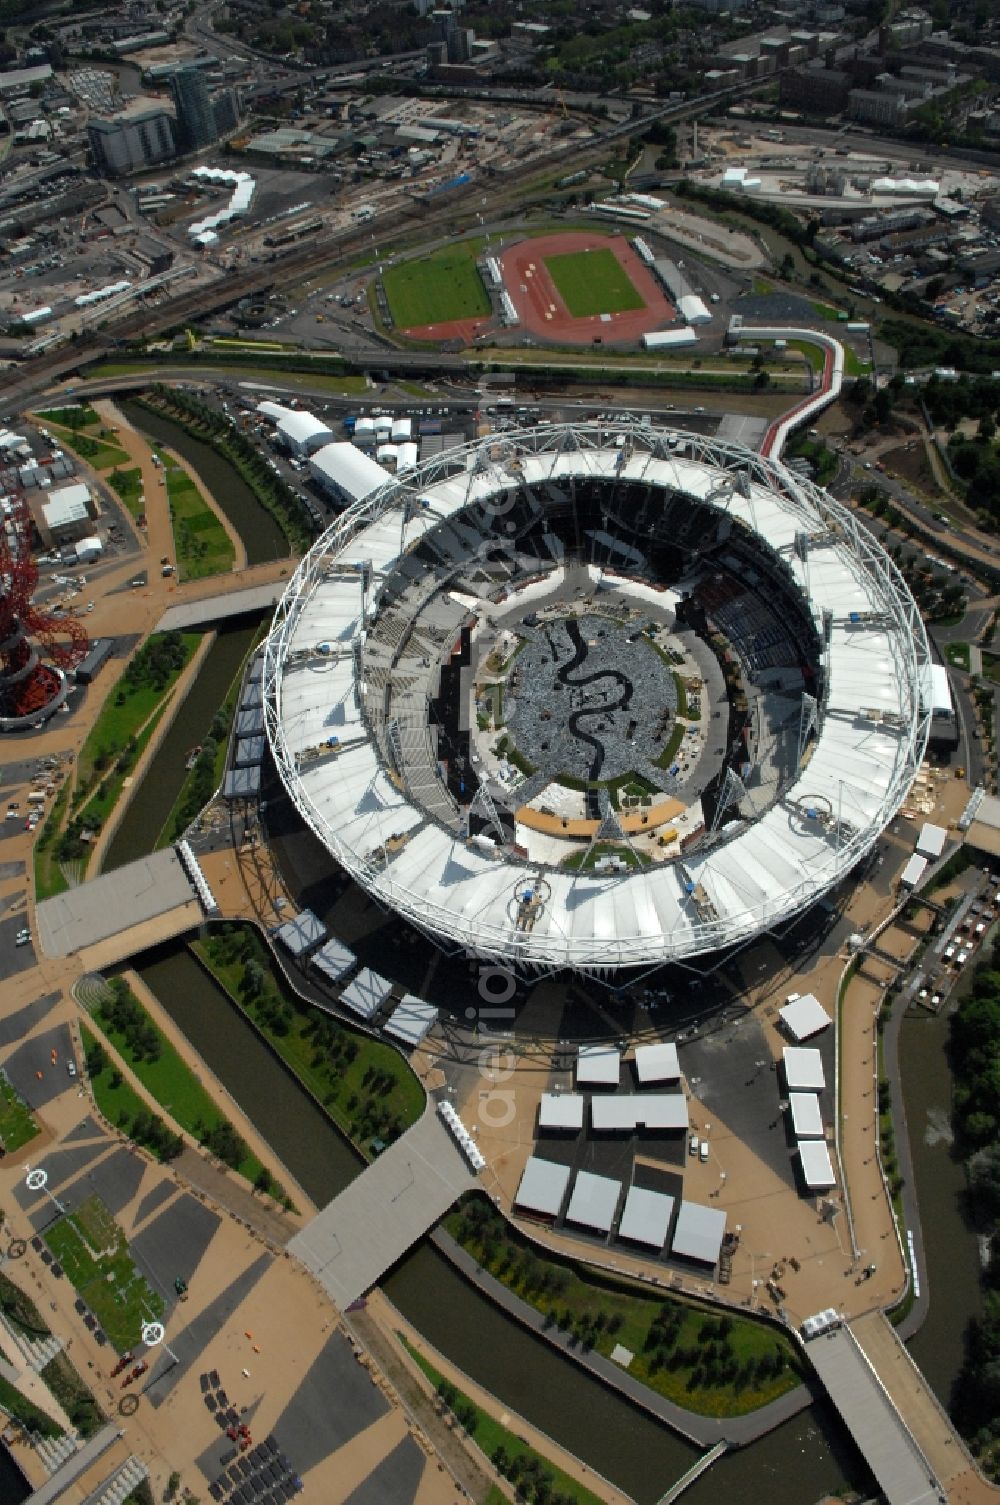 Aerial image London - The Olympic Stadium in Olympic Park, London, England, is designed to be the centrepiece of the 2012 Summer Olympics and 2012 Summer Paralympics, and the venue of the athletic events as well as the Olympic Games opening and closing ceremonies in Great Britain